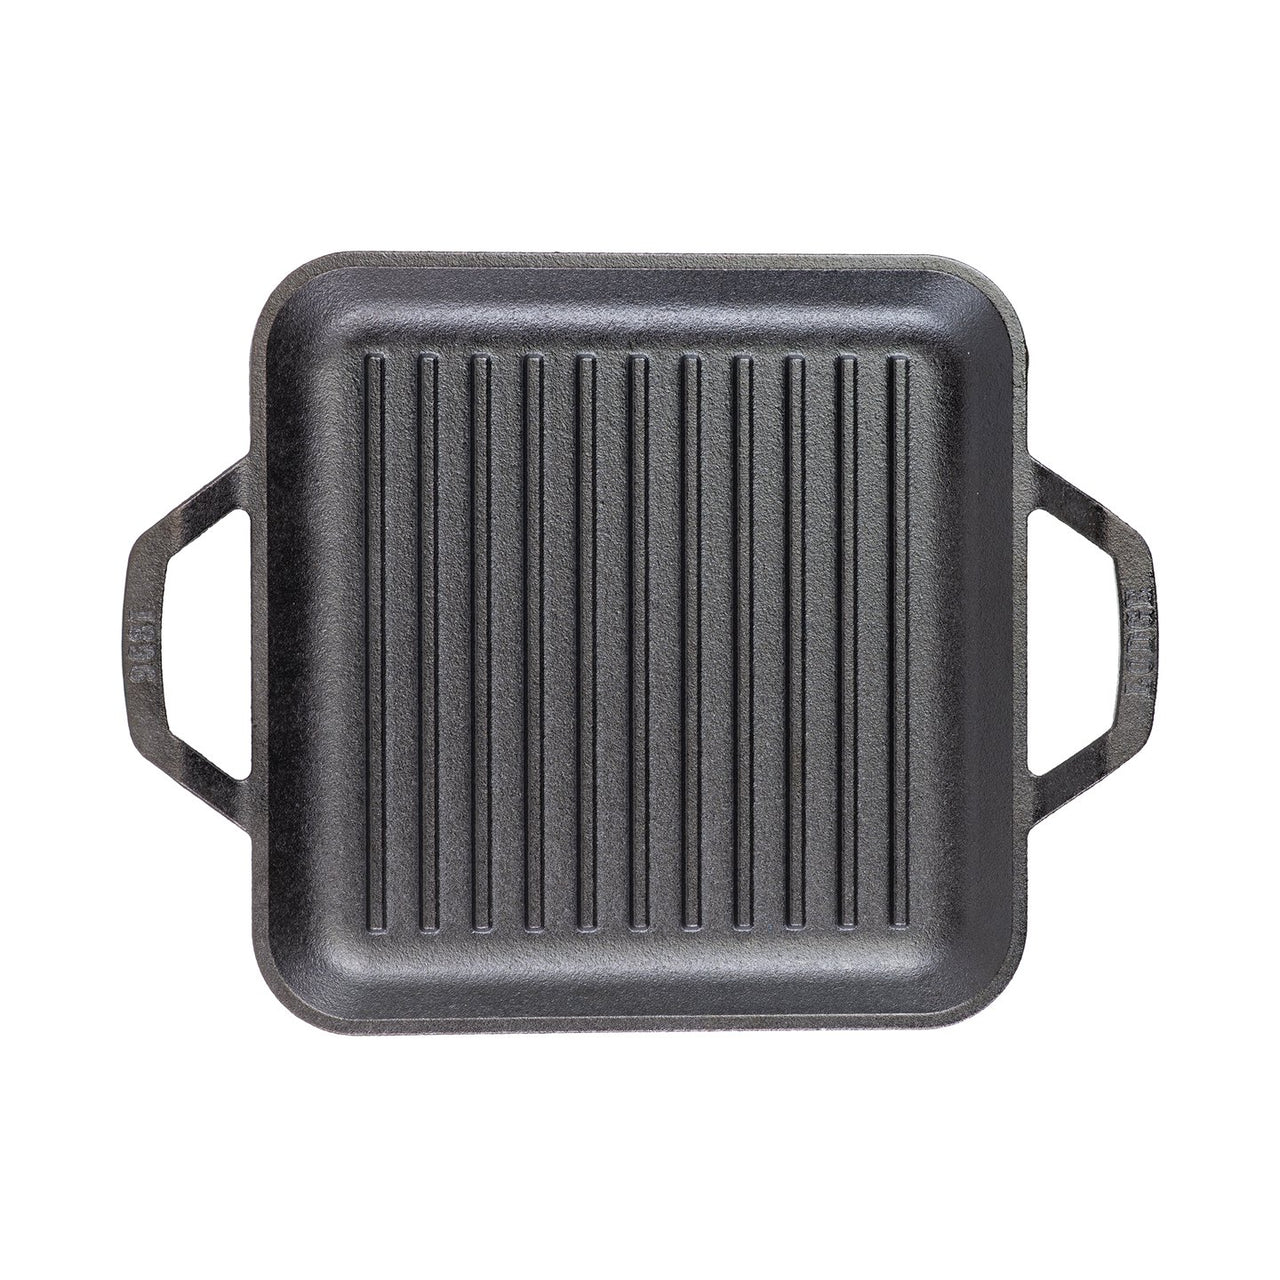 Lodge Chef Collection Square Grill Pan 2 Handles / 28cm / 11"